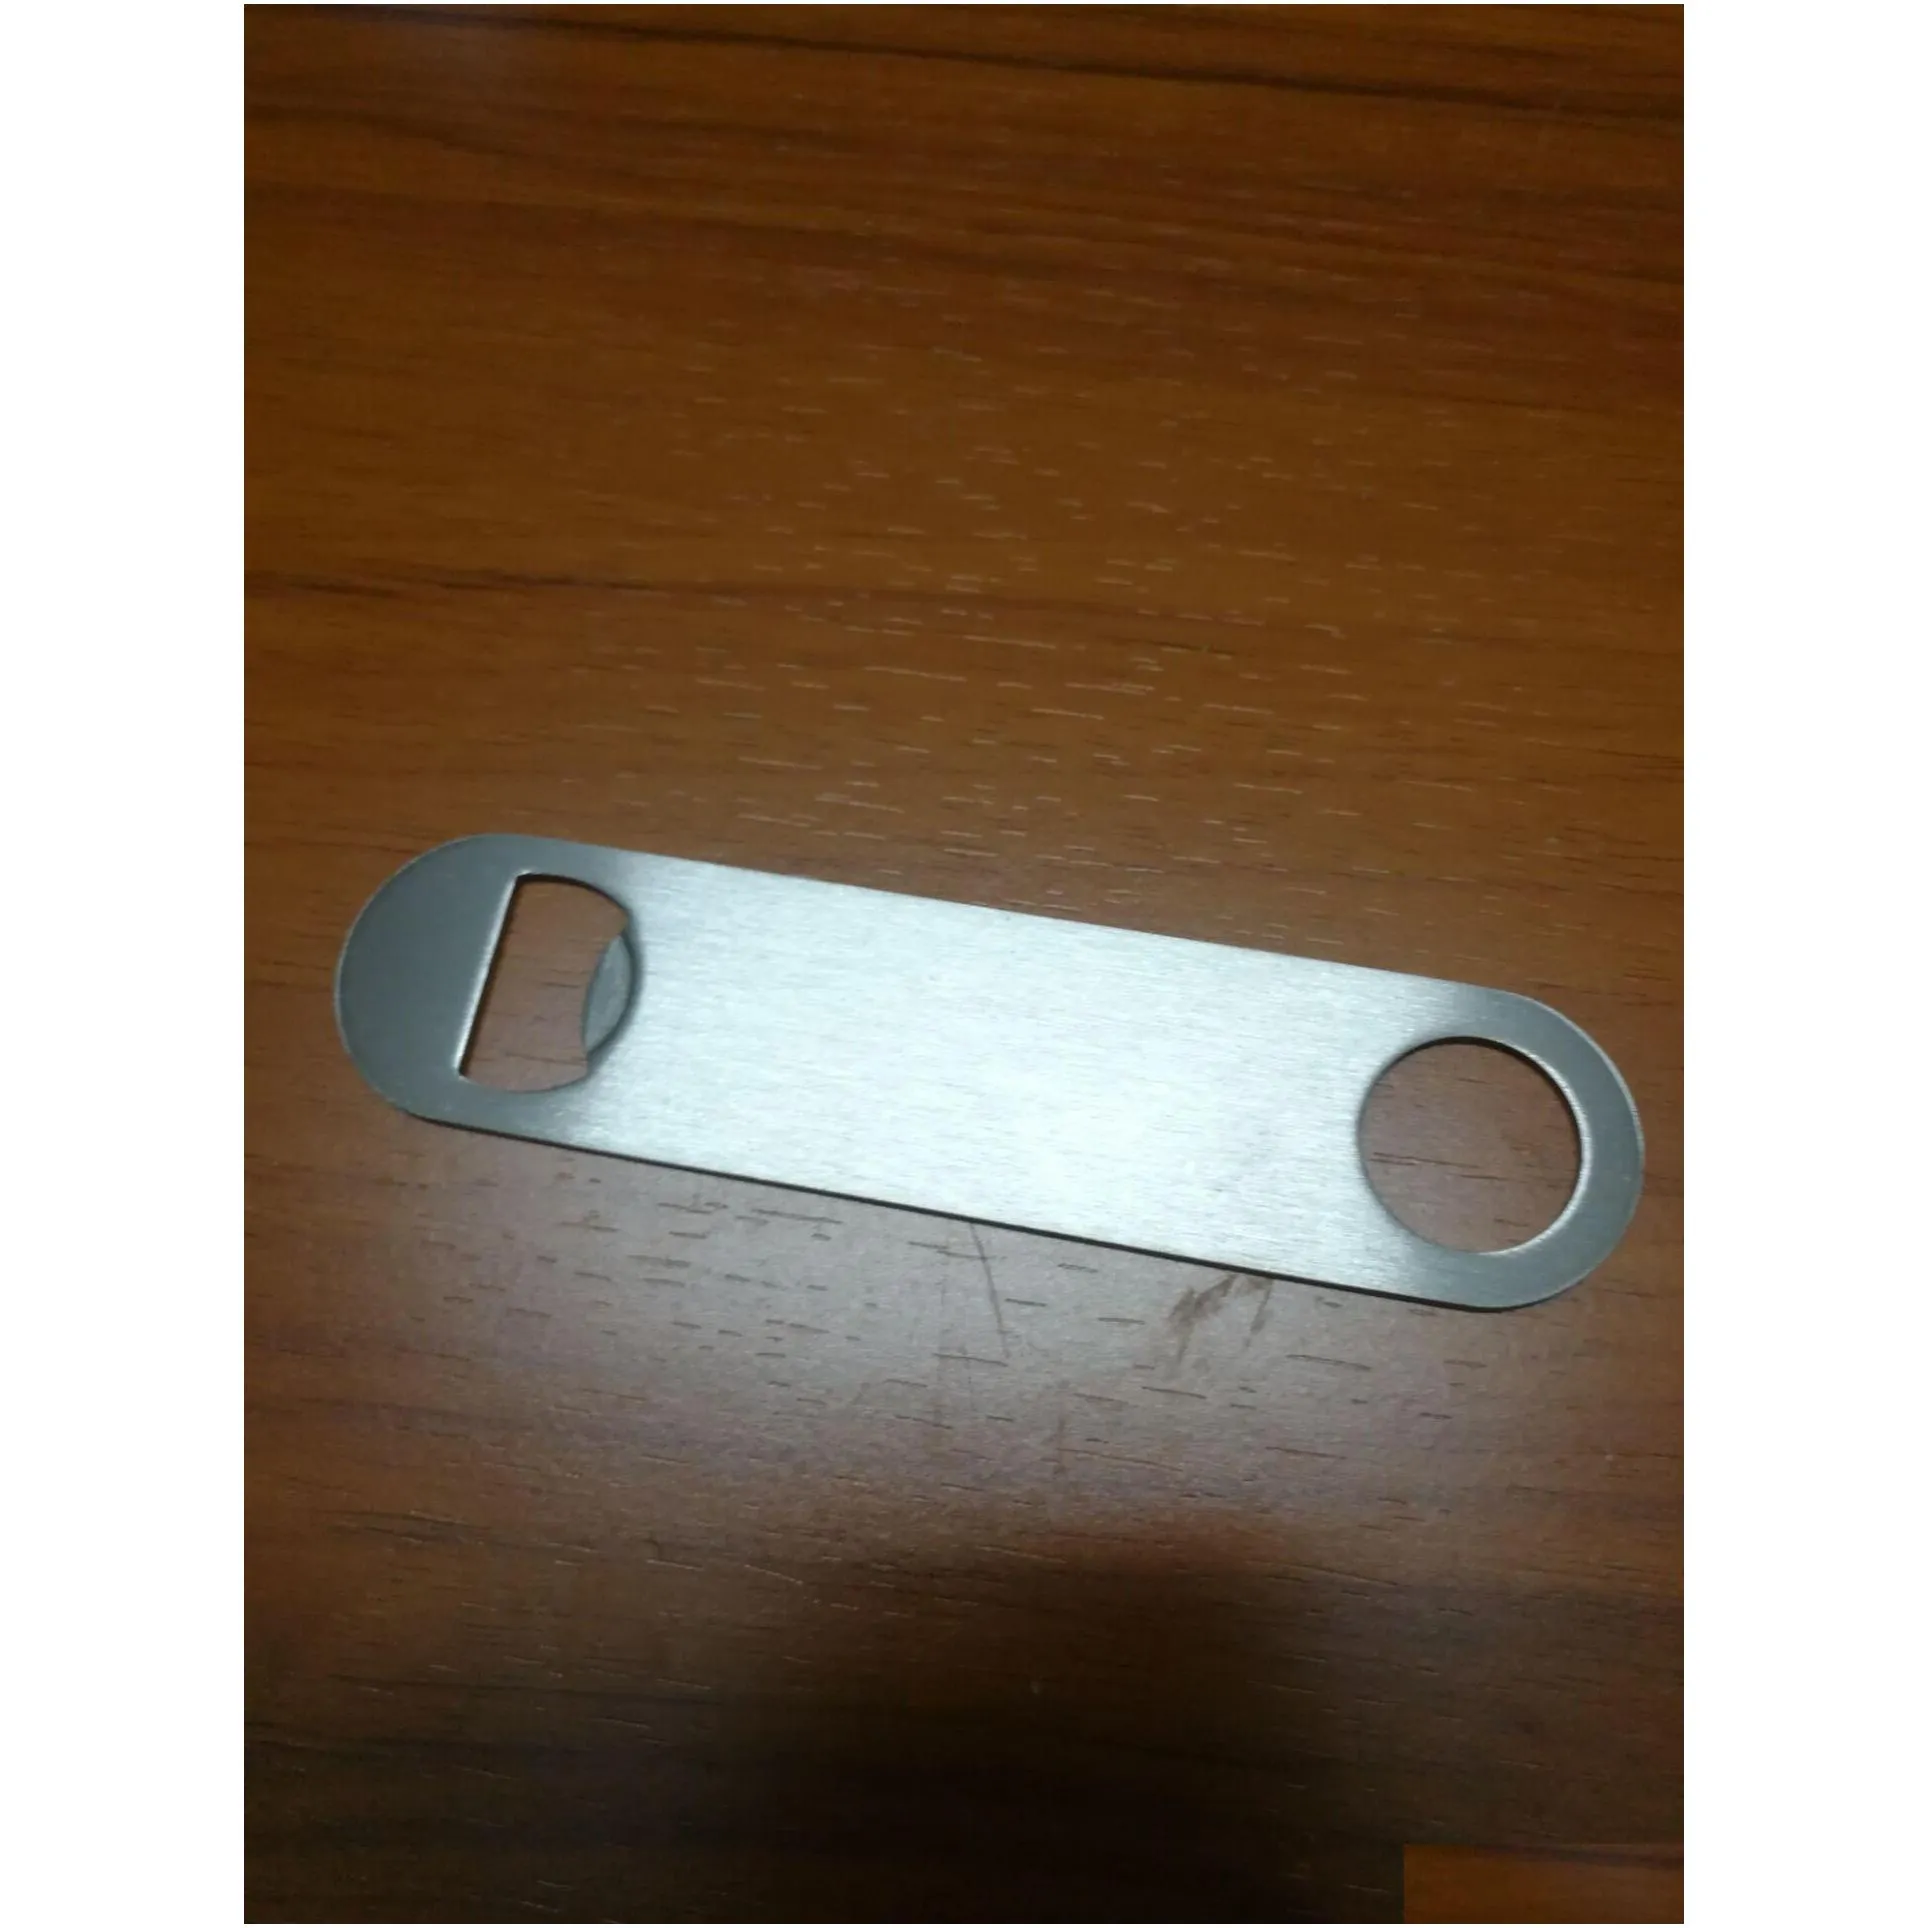 dhs shipping 50pcs heavy duty stainless steel flat bottle opener